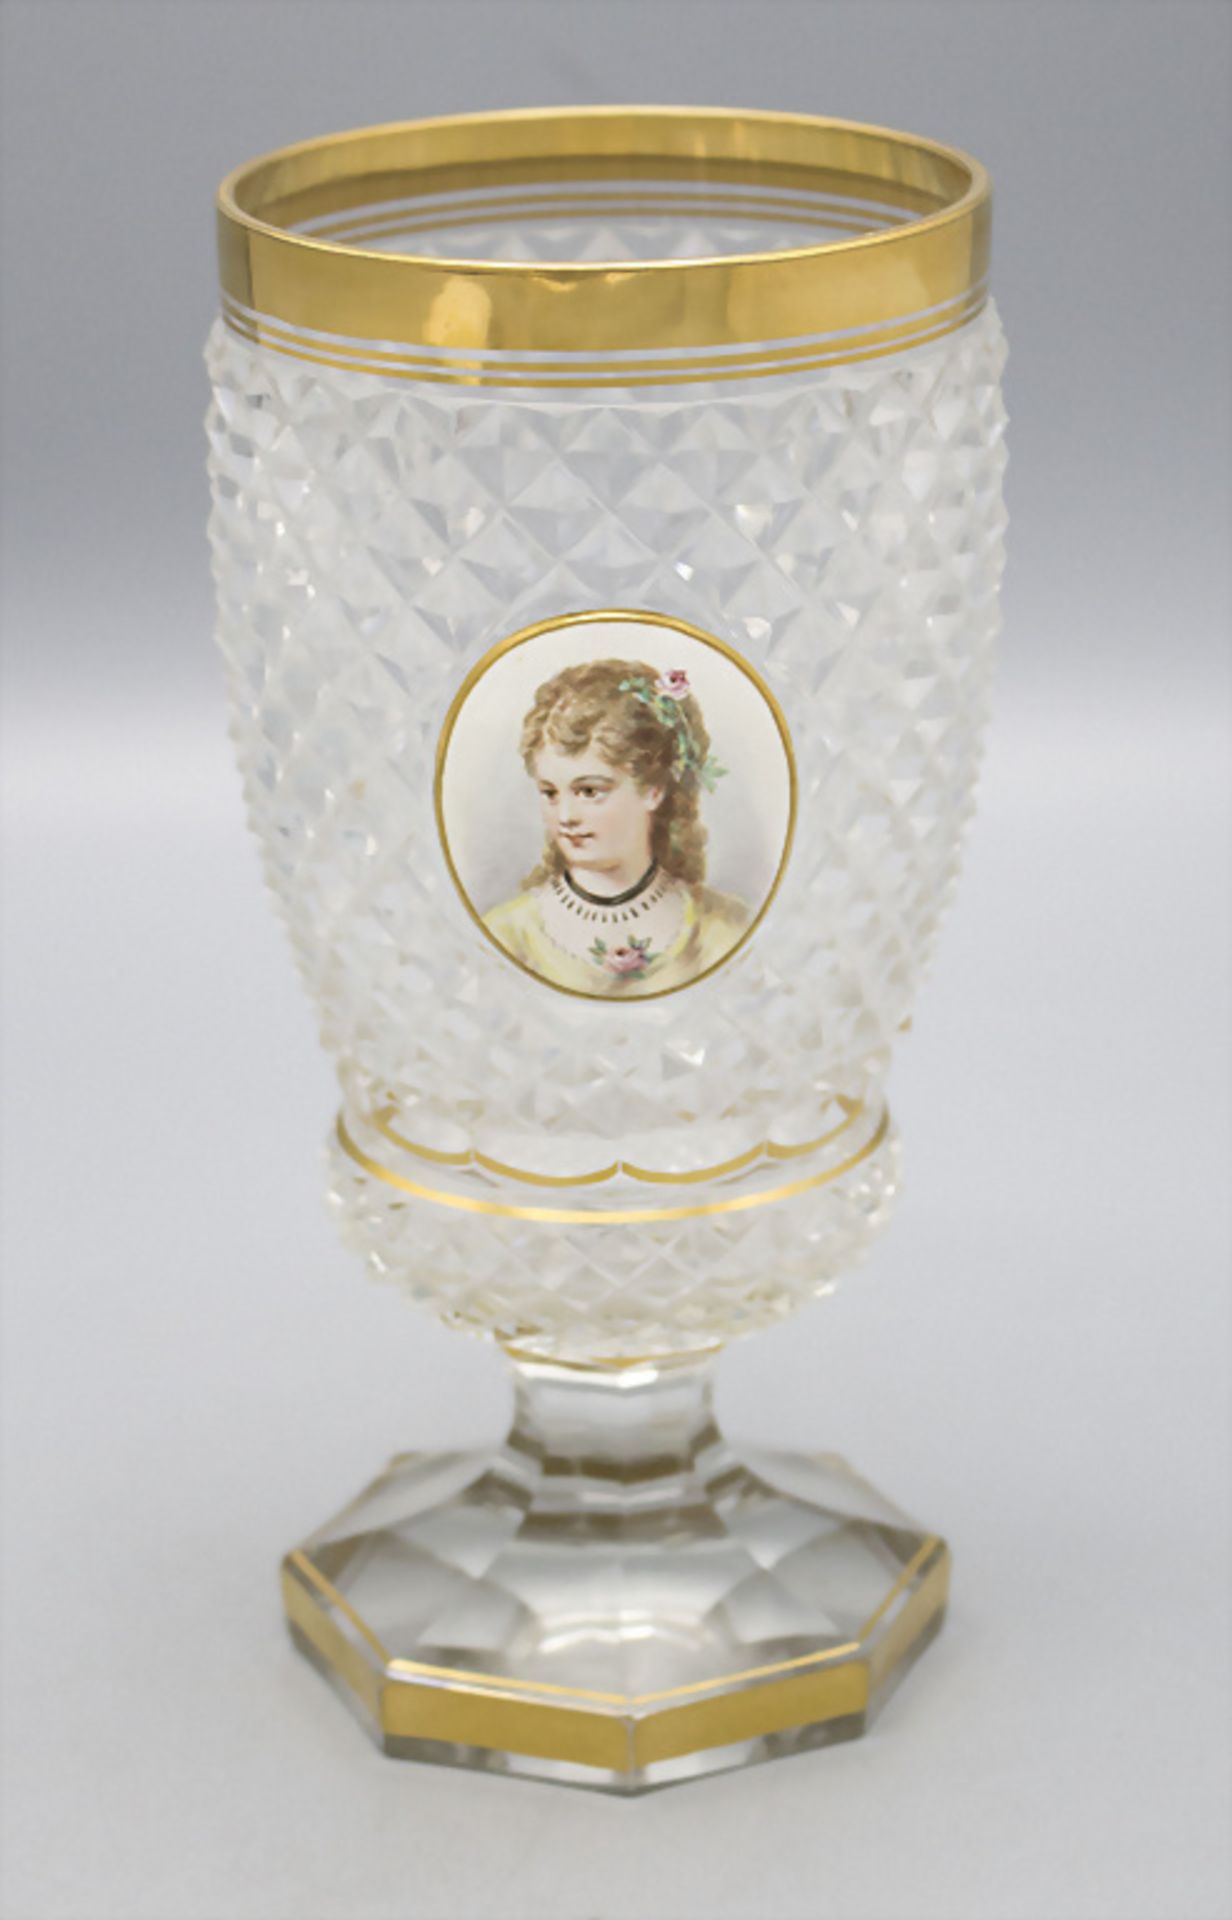 Bäderglas mit junger Dame / A glass with the miniature of a young lady, Böhmen, 19. Jh.